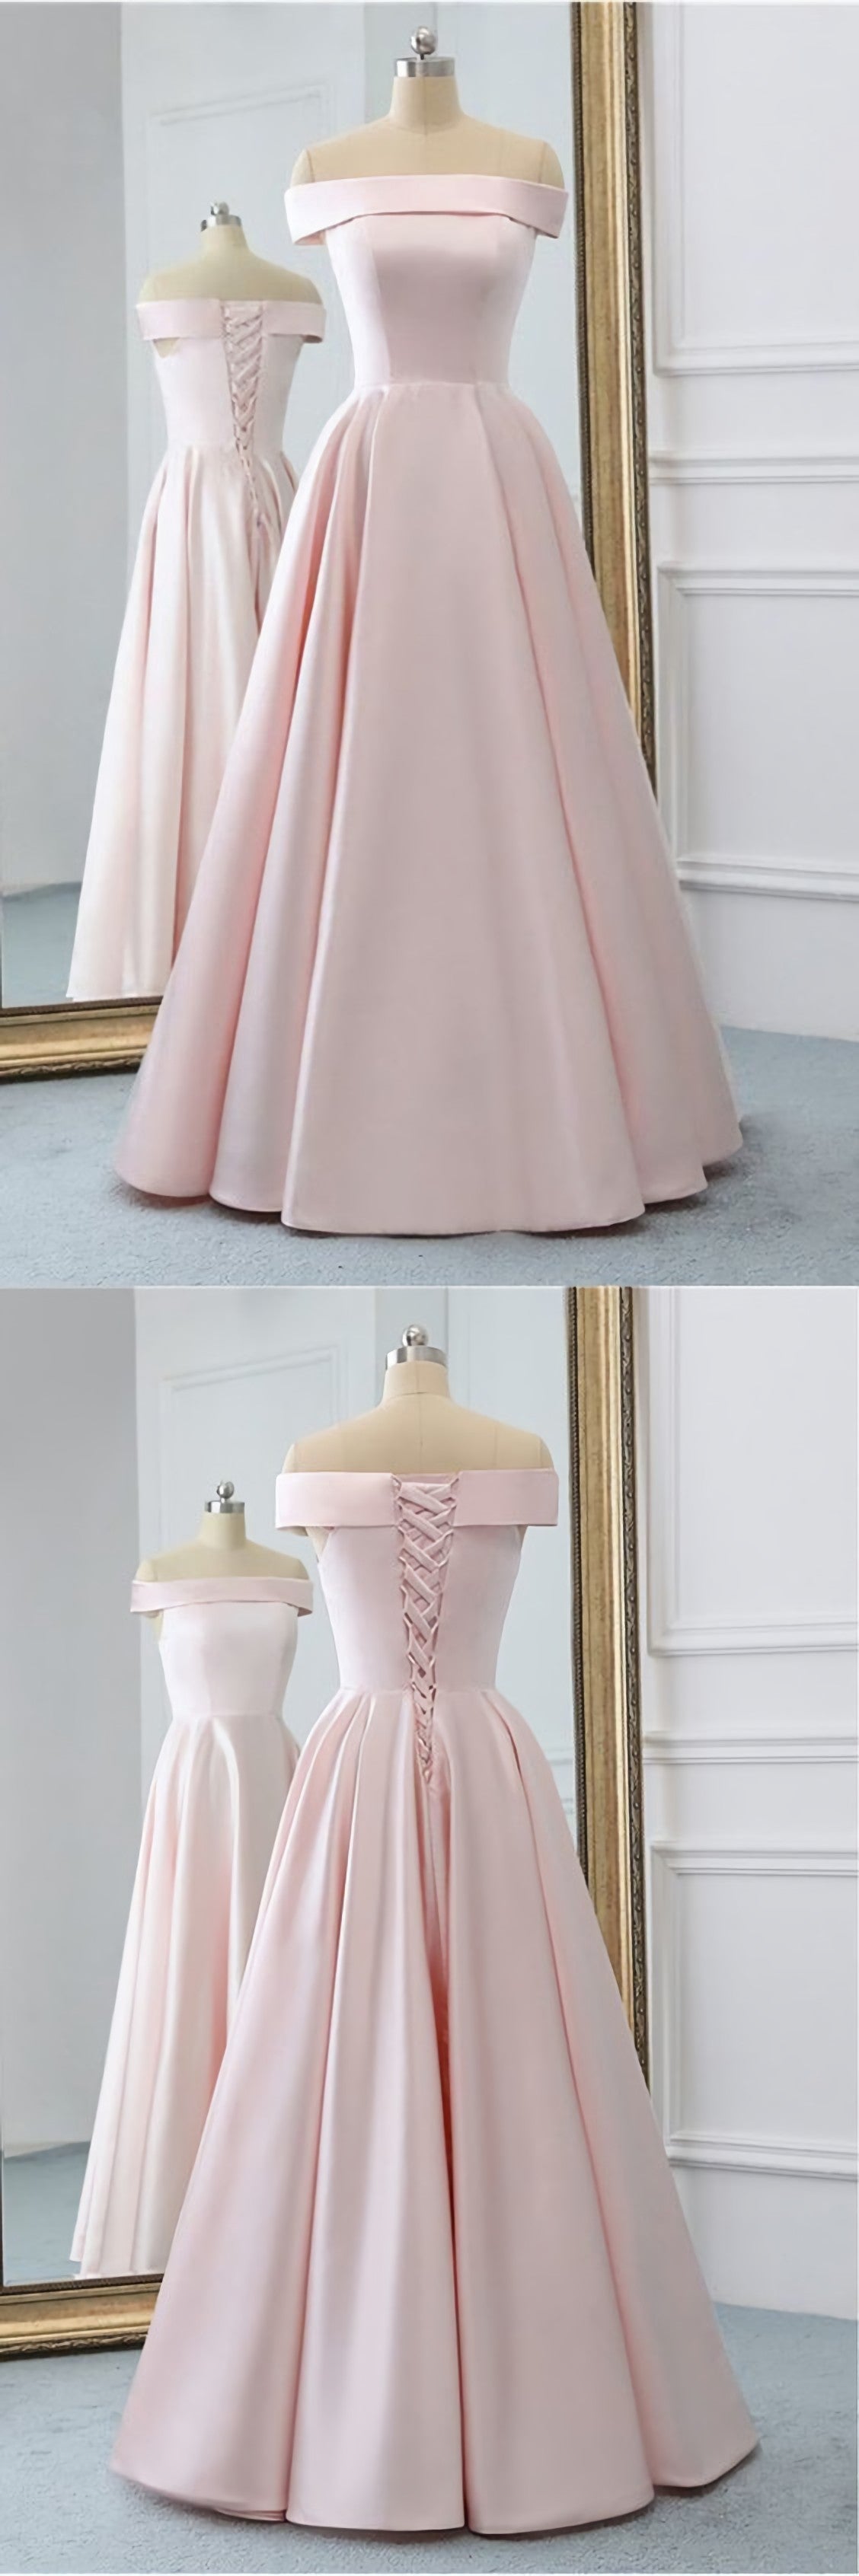 Club Outfit, Pink Satin Long Evening Dress, With Pockets Pink Prom Gowns